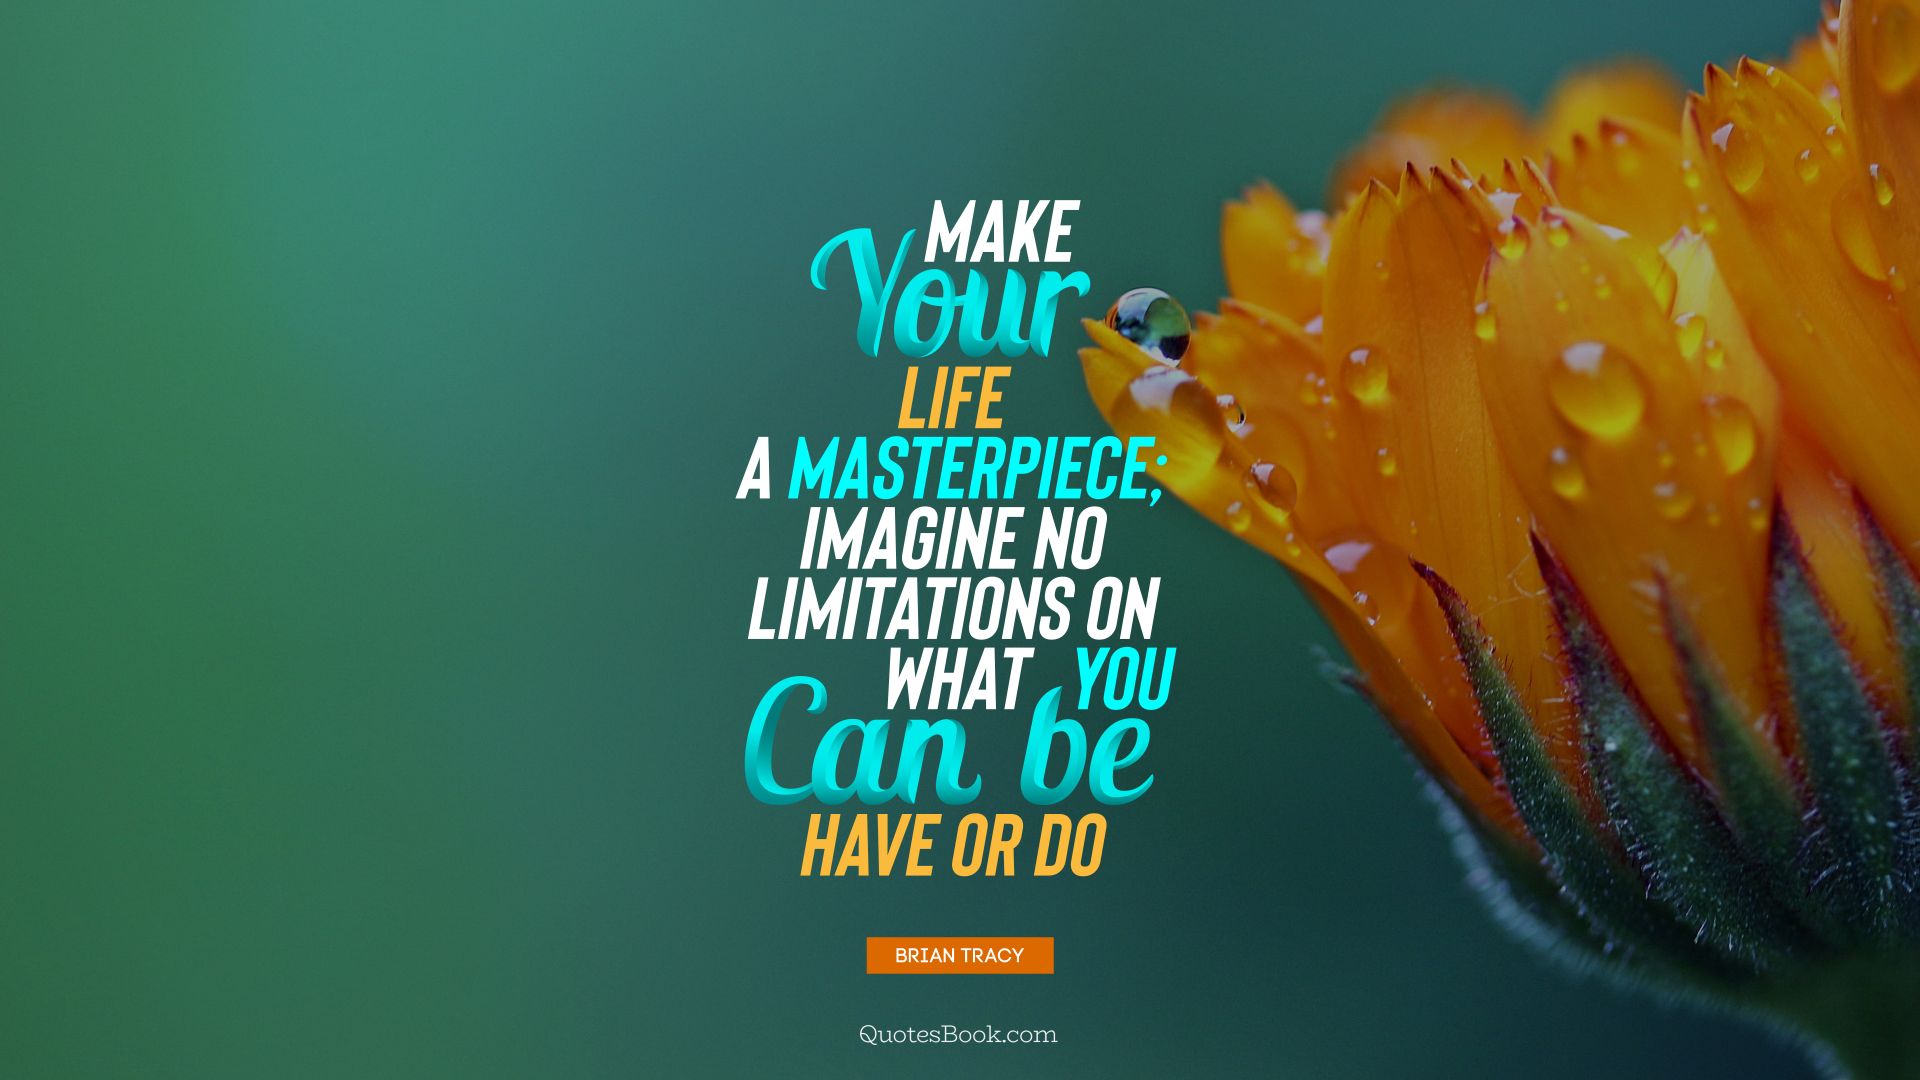 Make your life a masterpiece; imagine no limitations on what you can be, have or do. - Quote by Brian Tracy